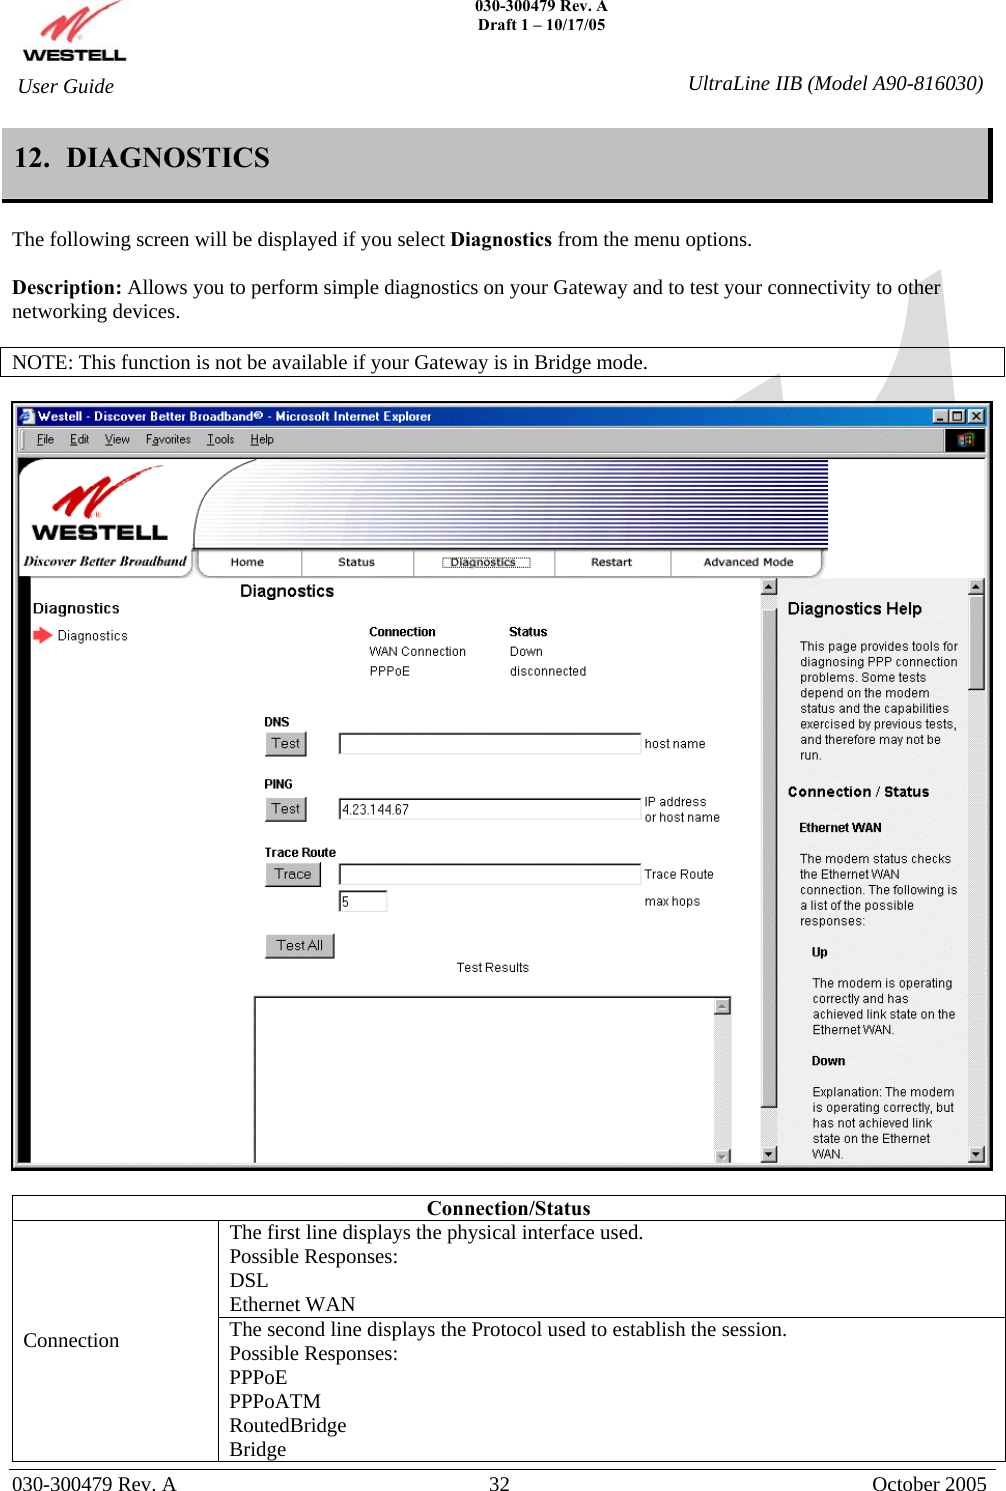    030-300479 Rev. A Draft 1 – 10/17/05   030-300479 Rev. A  32  October 2005  User Guide  UltraLine IIB (Model A90-816030)12.  DIAGNOSTICS  The following screen will be displayed if you select Diagnostics from the menu options.  Description: Allows you to perform simple diagnostics on your Gateway and to test your connectivity to other networking devices.  NOTE: This function is not be available if your Gateway is in Bridge mode.    Connection/Status The first line displays the physical interface used. Possible Responses: DSL  Ethernet WAN Connection  The second line displays the Protocol used to establish the session. Possible Responses: PPPoE PPPoATM RoutedBridge Bridge 